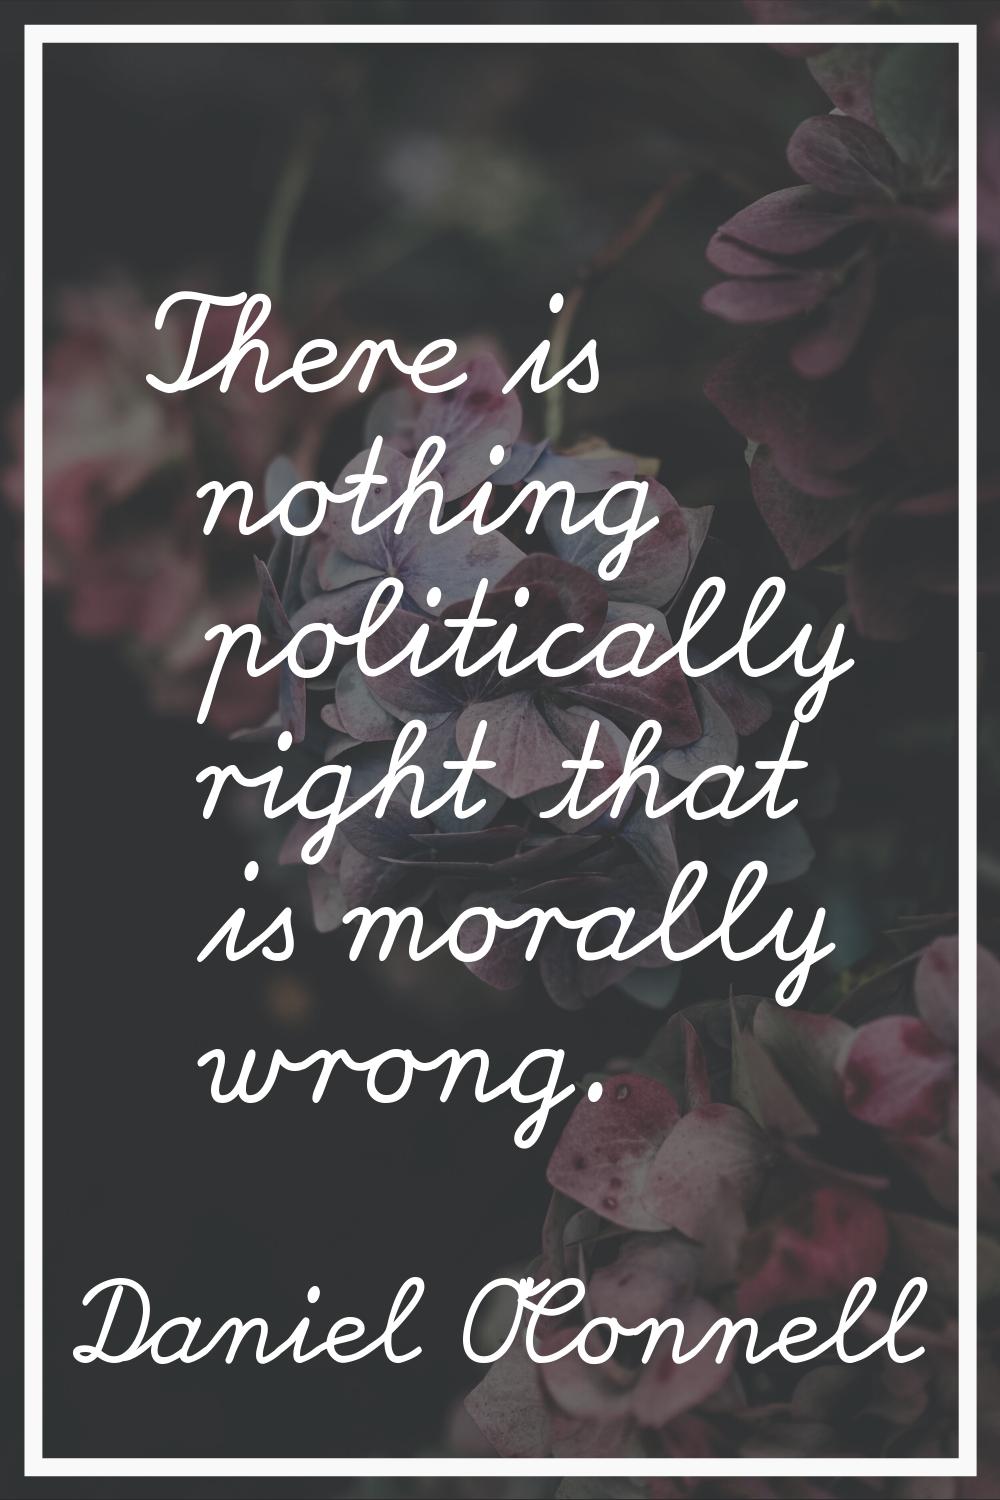 There is nothing politically right that is morally wrong.